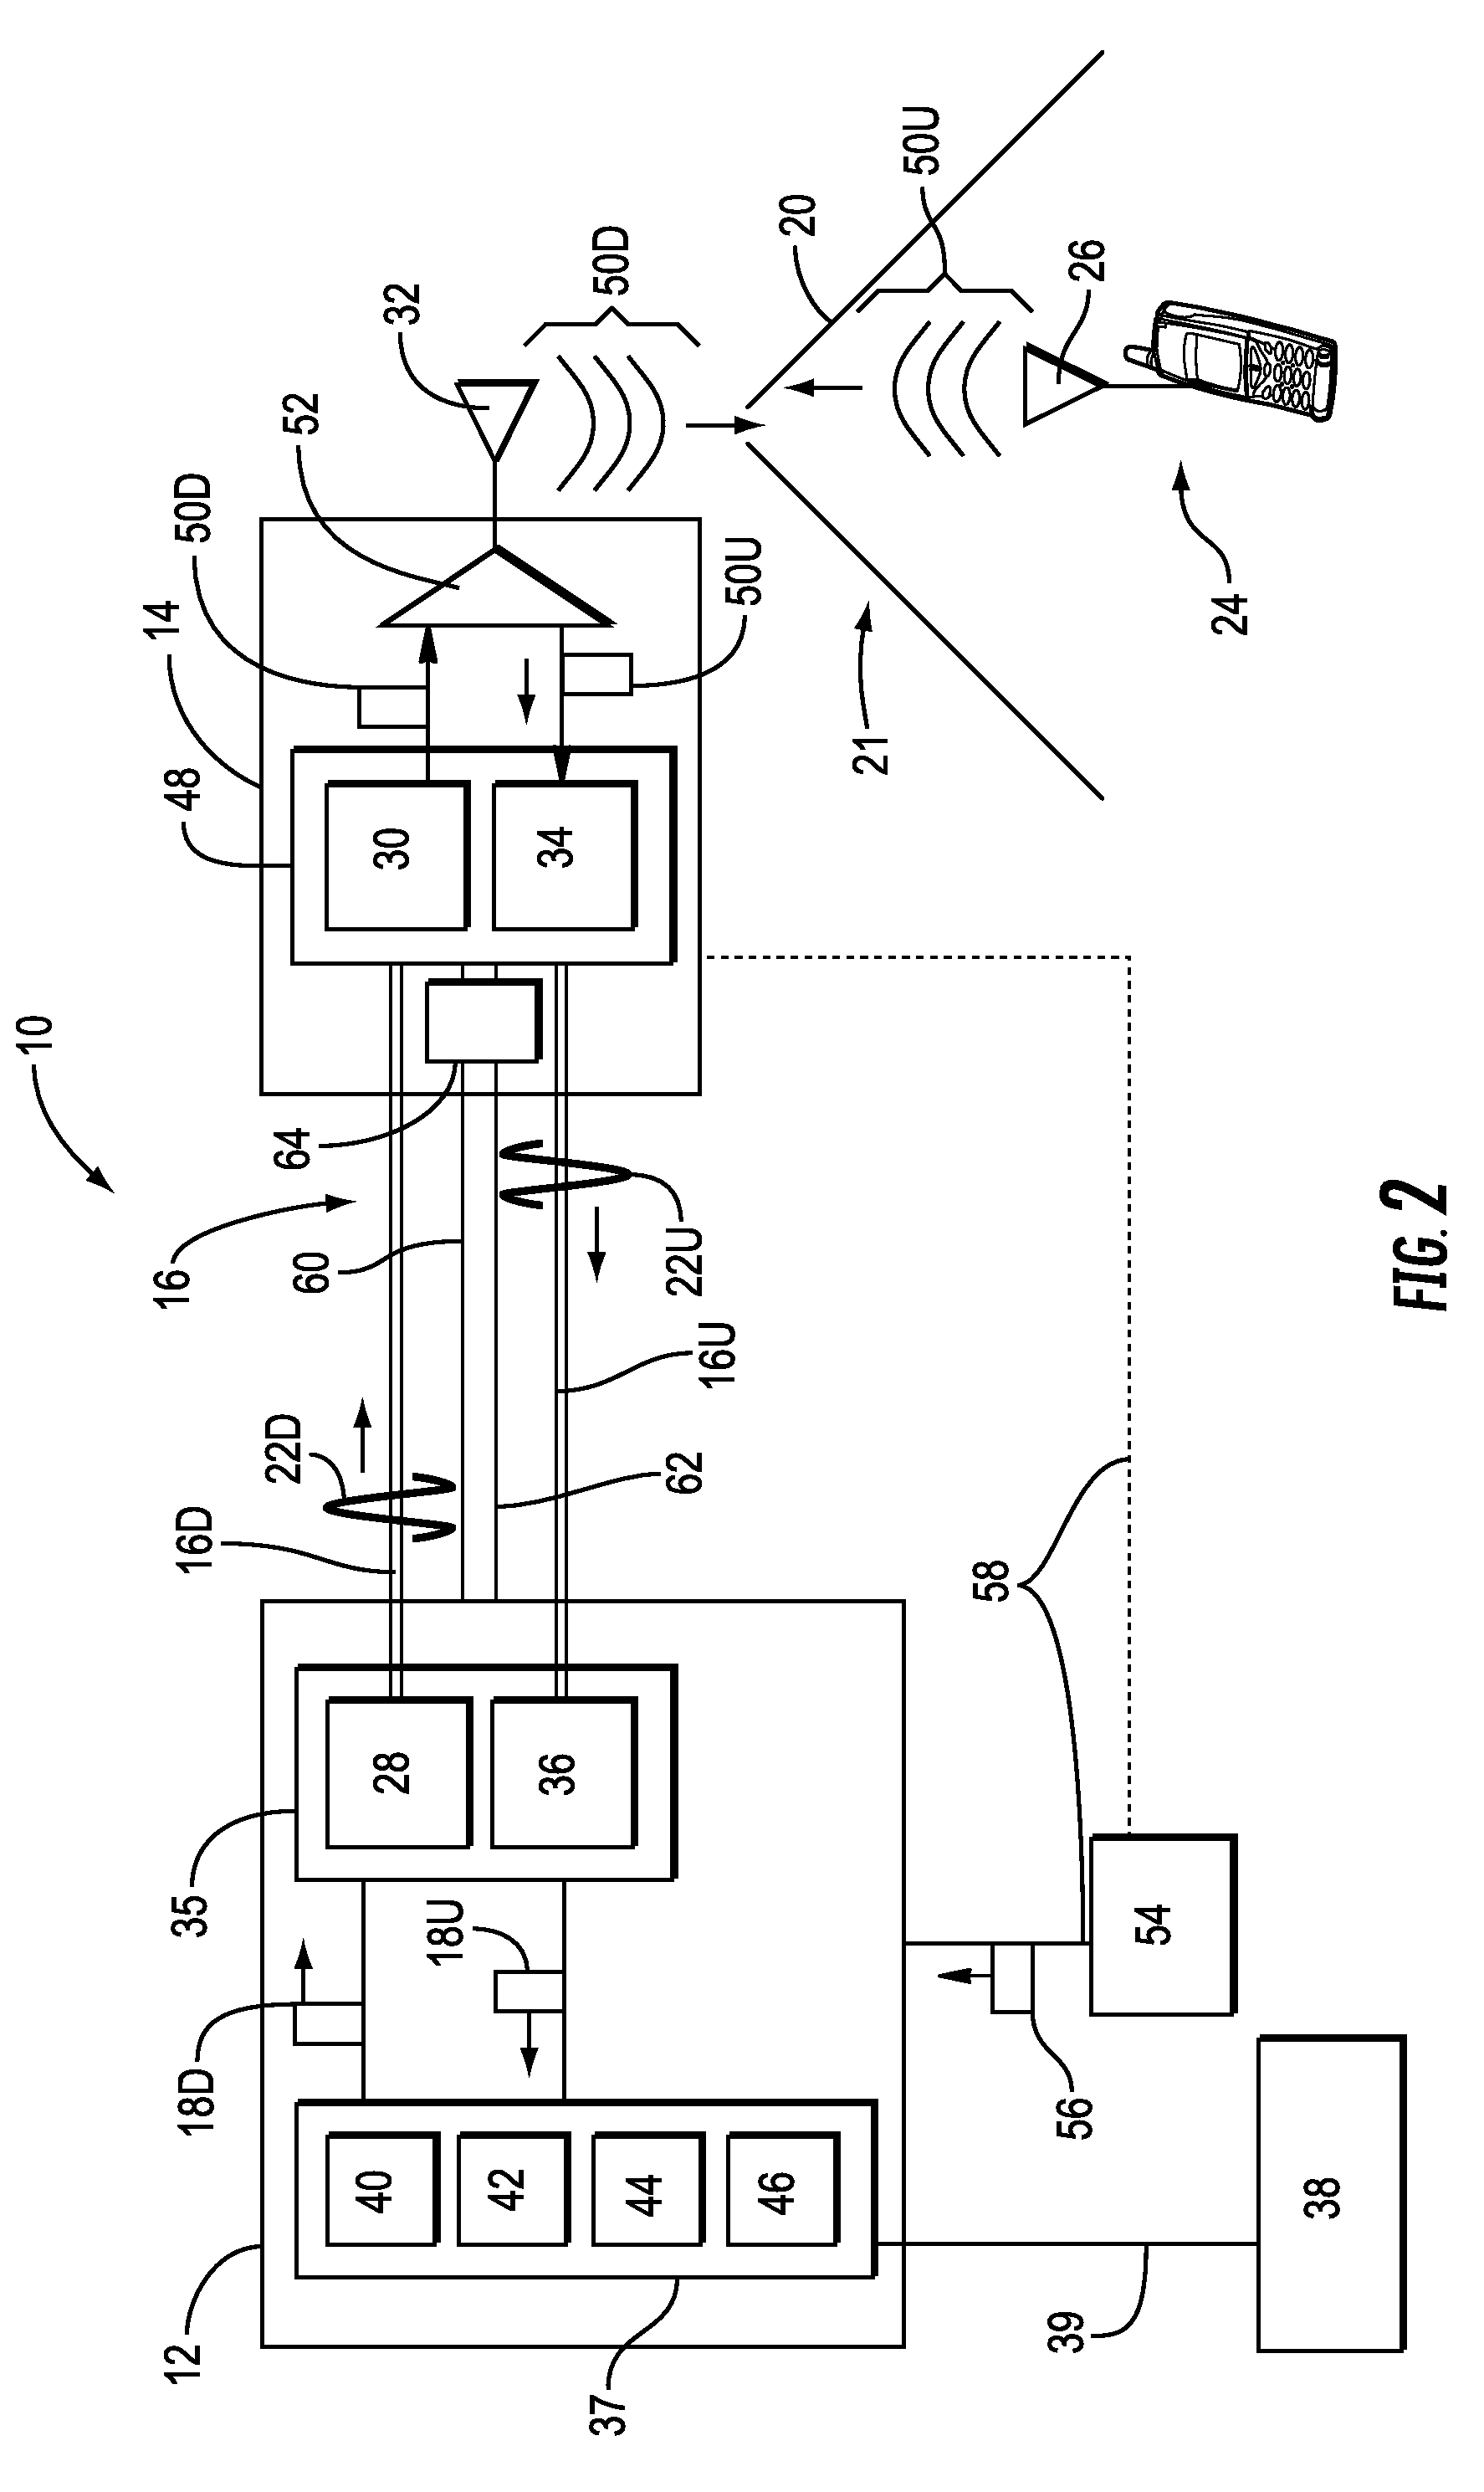 Power distribution module(s) capable of hot connection and/or disconnection for distributed antenna systems, and related power units, components, and methods